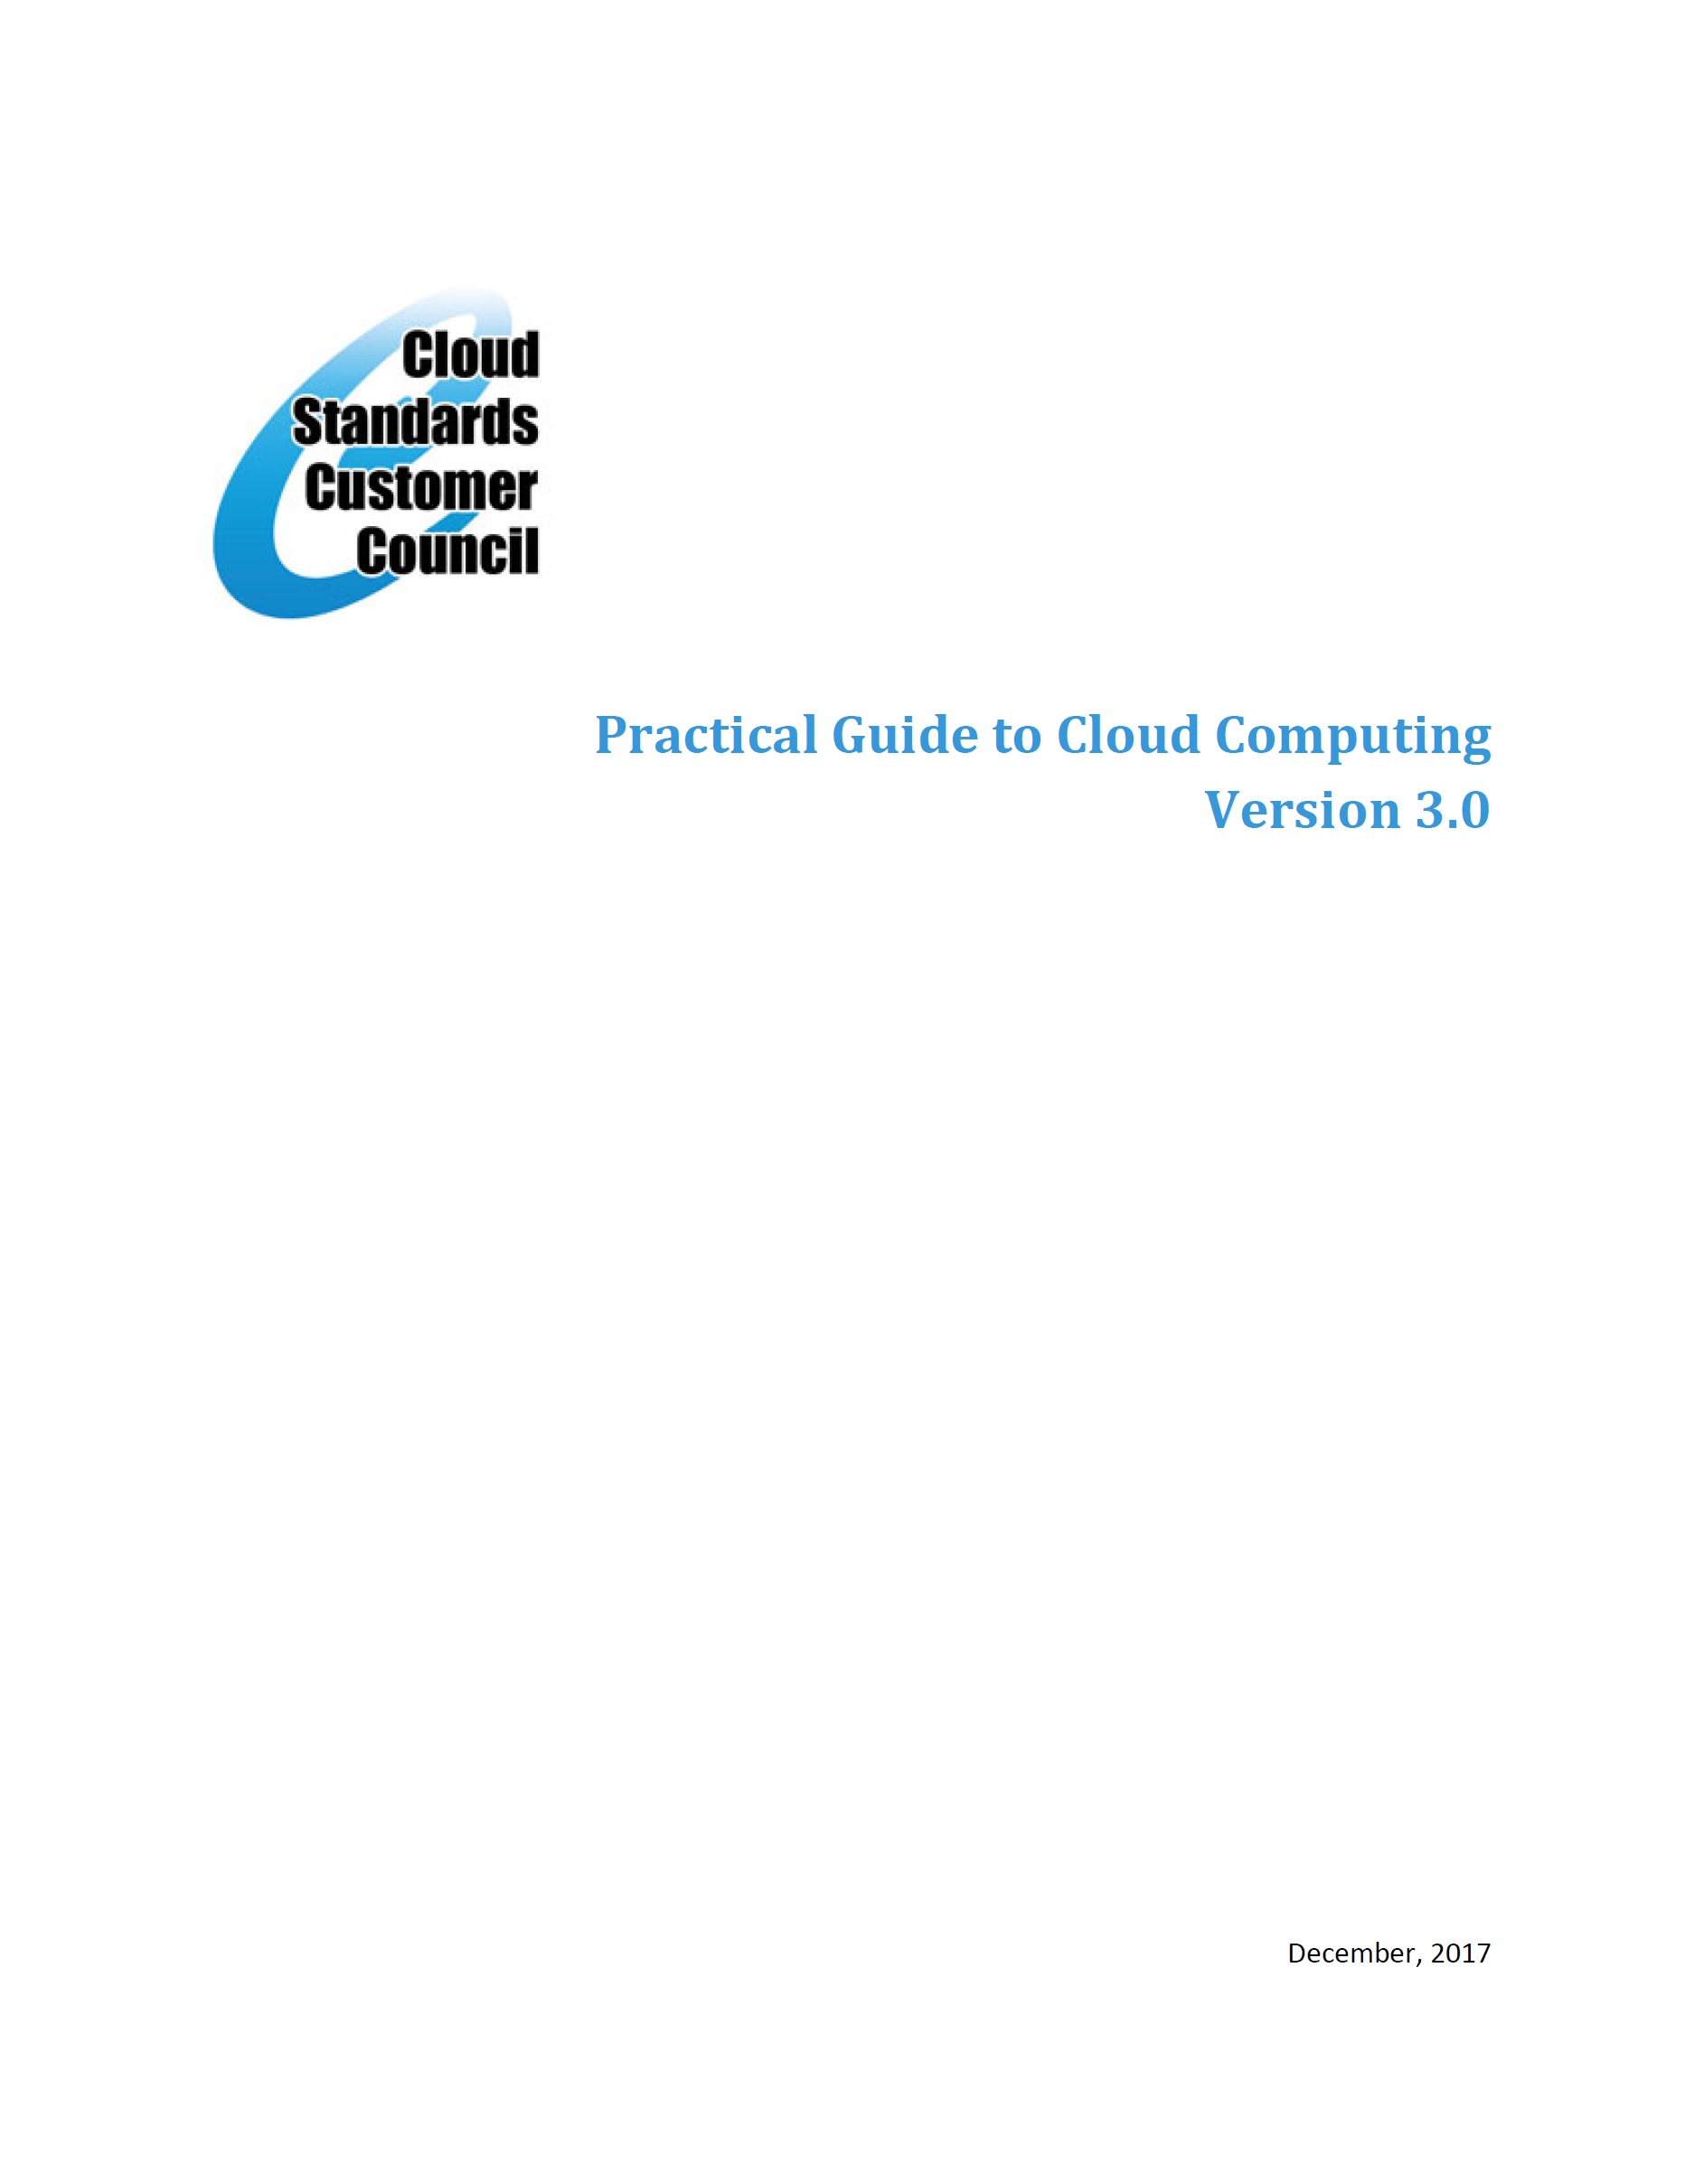 Practical Guide to Cloud Computing – CSCC, 2017